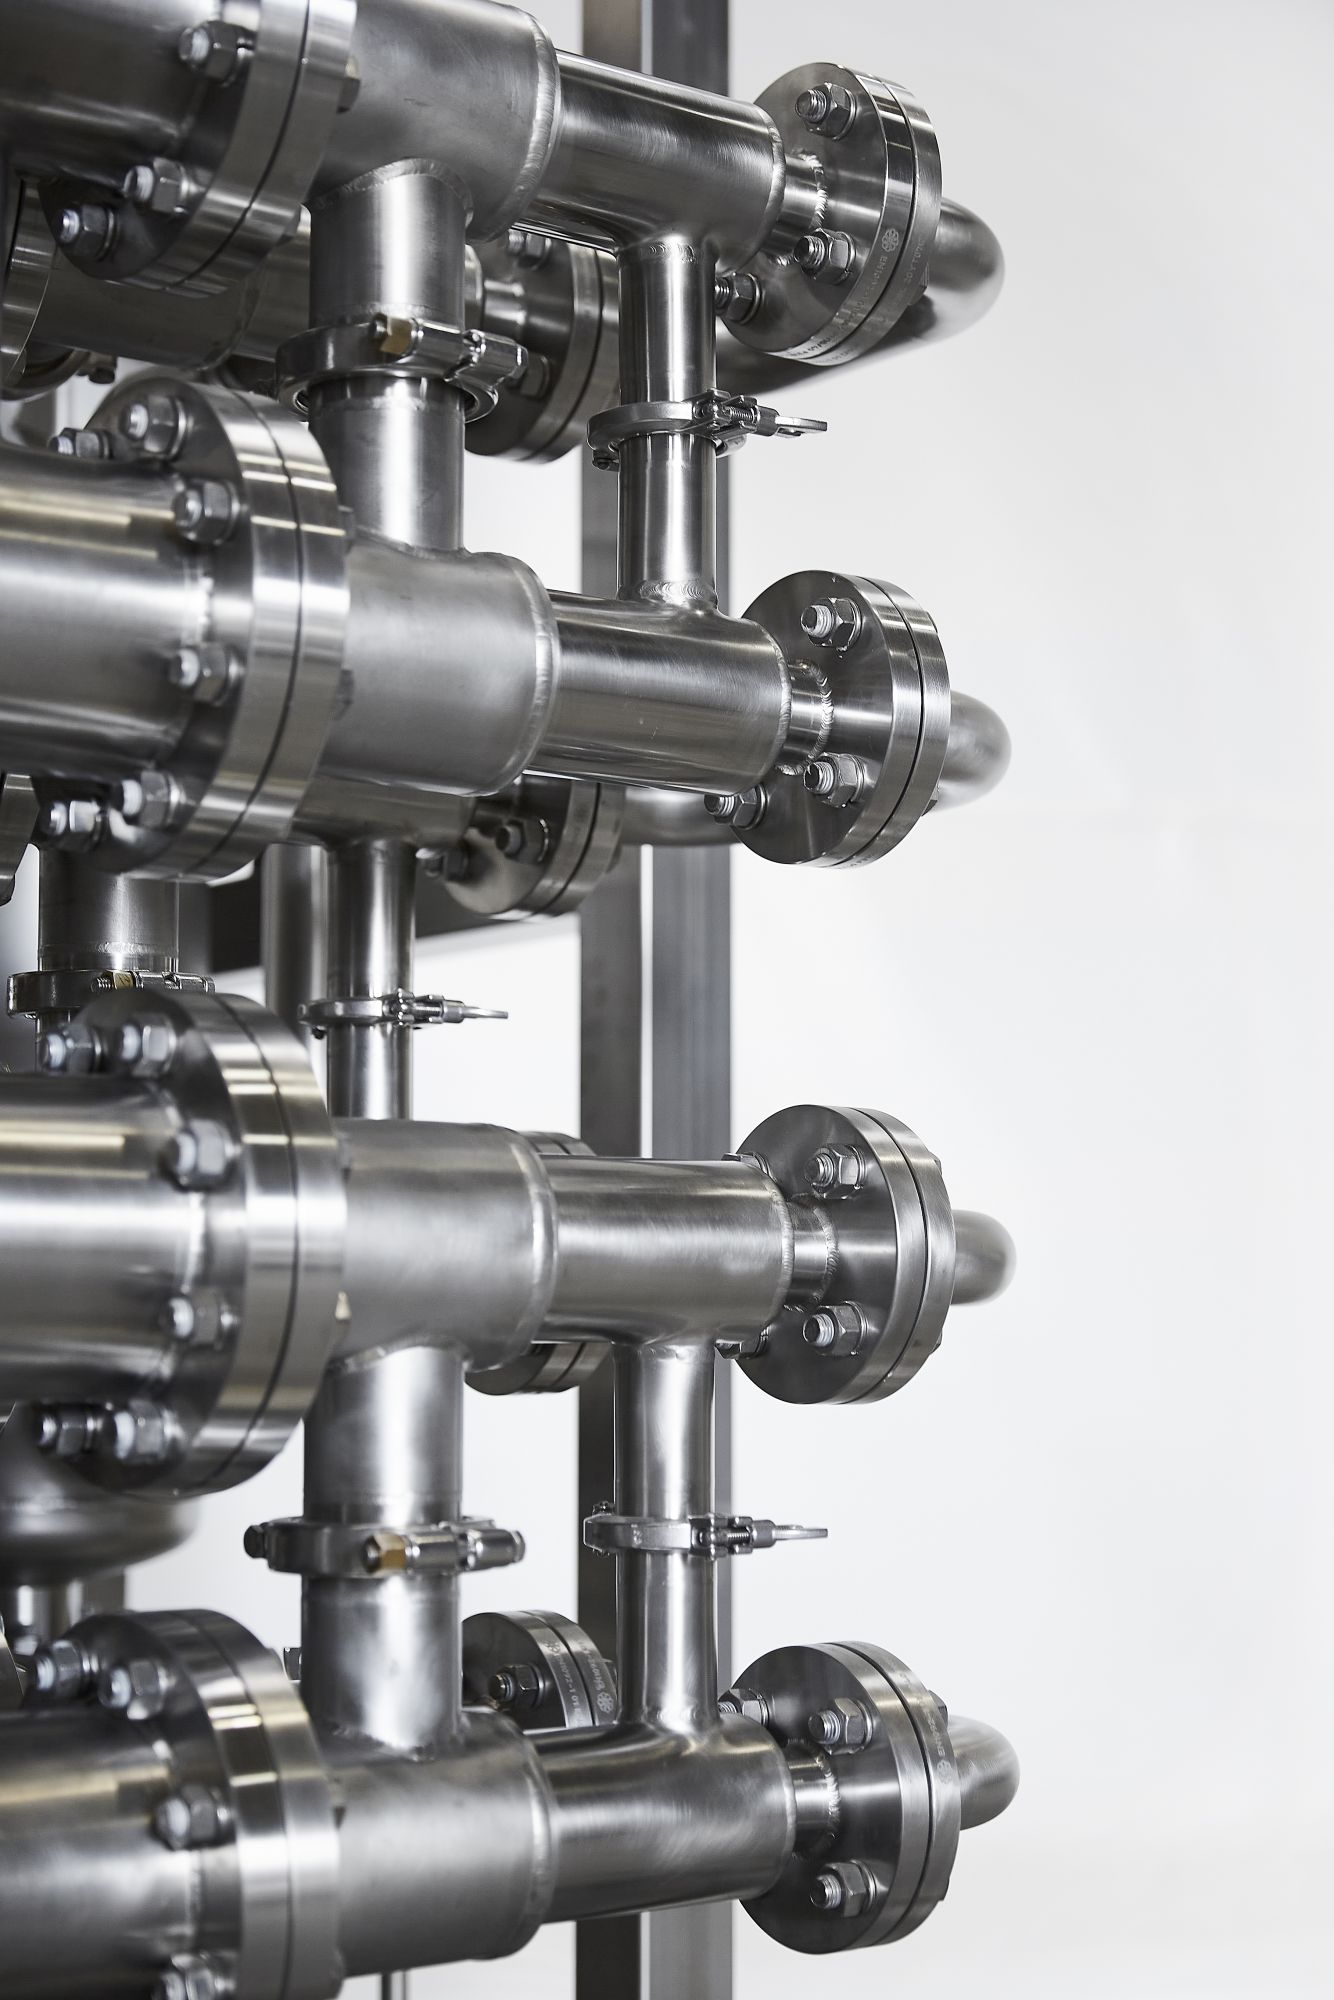 Tube-in-tube or annular space heat exchangers are designed for more viscous materials.